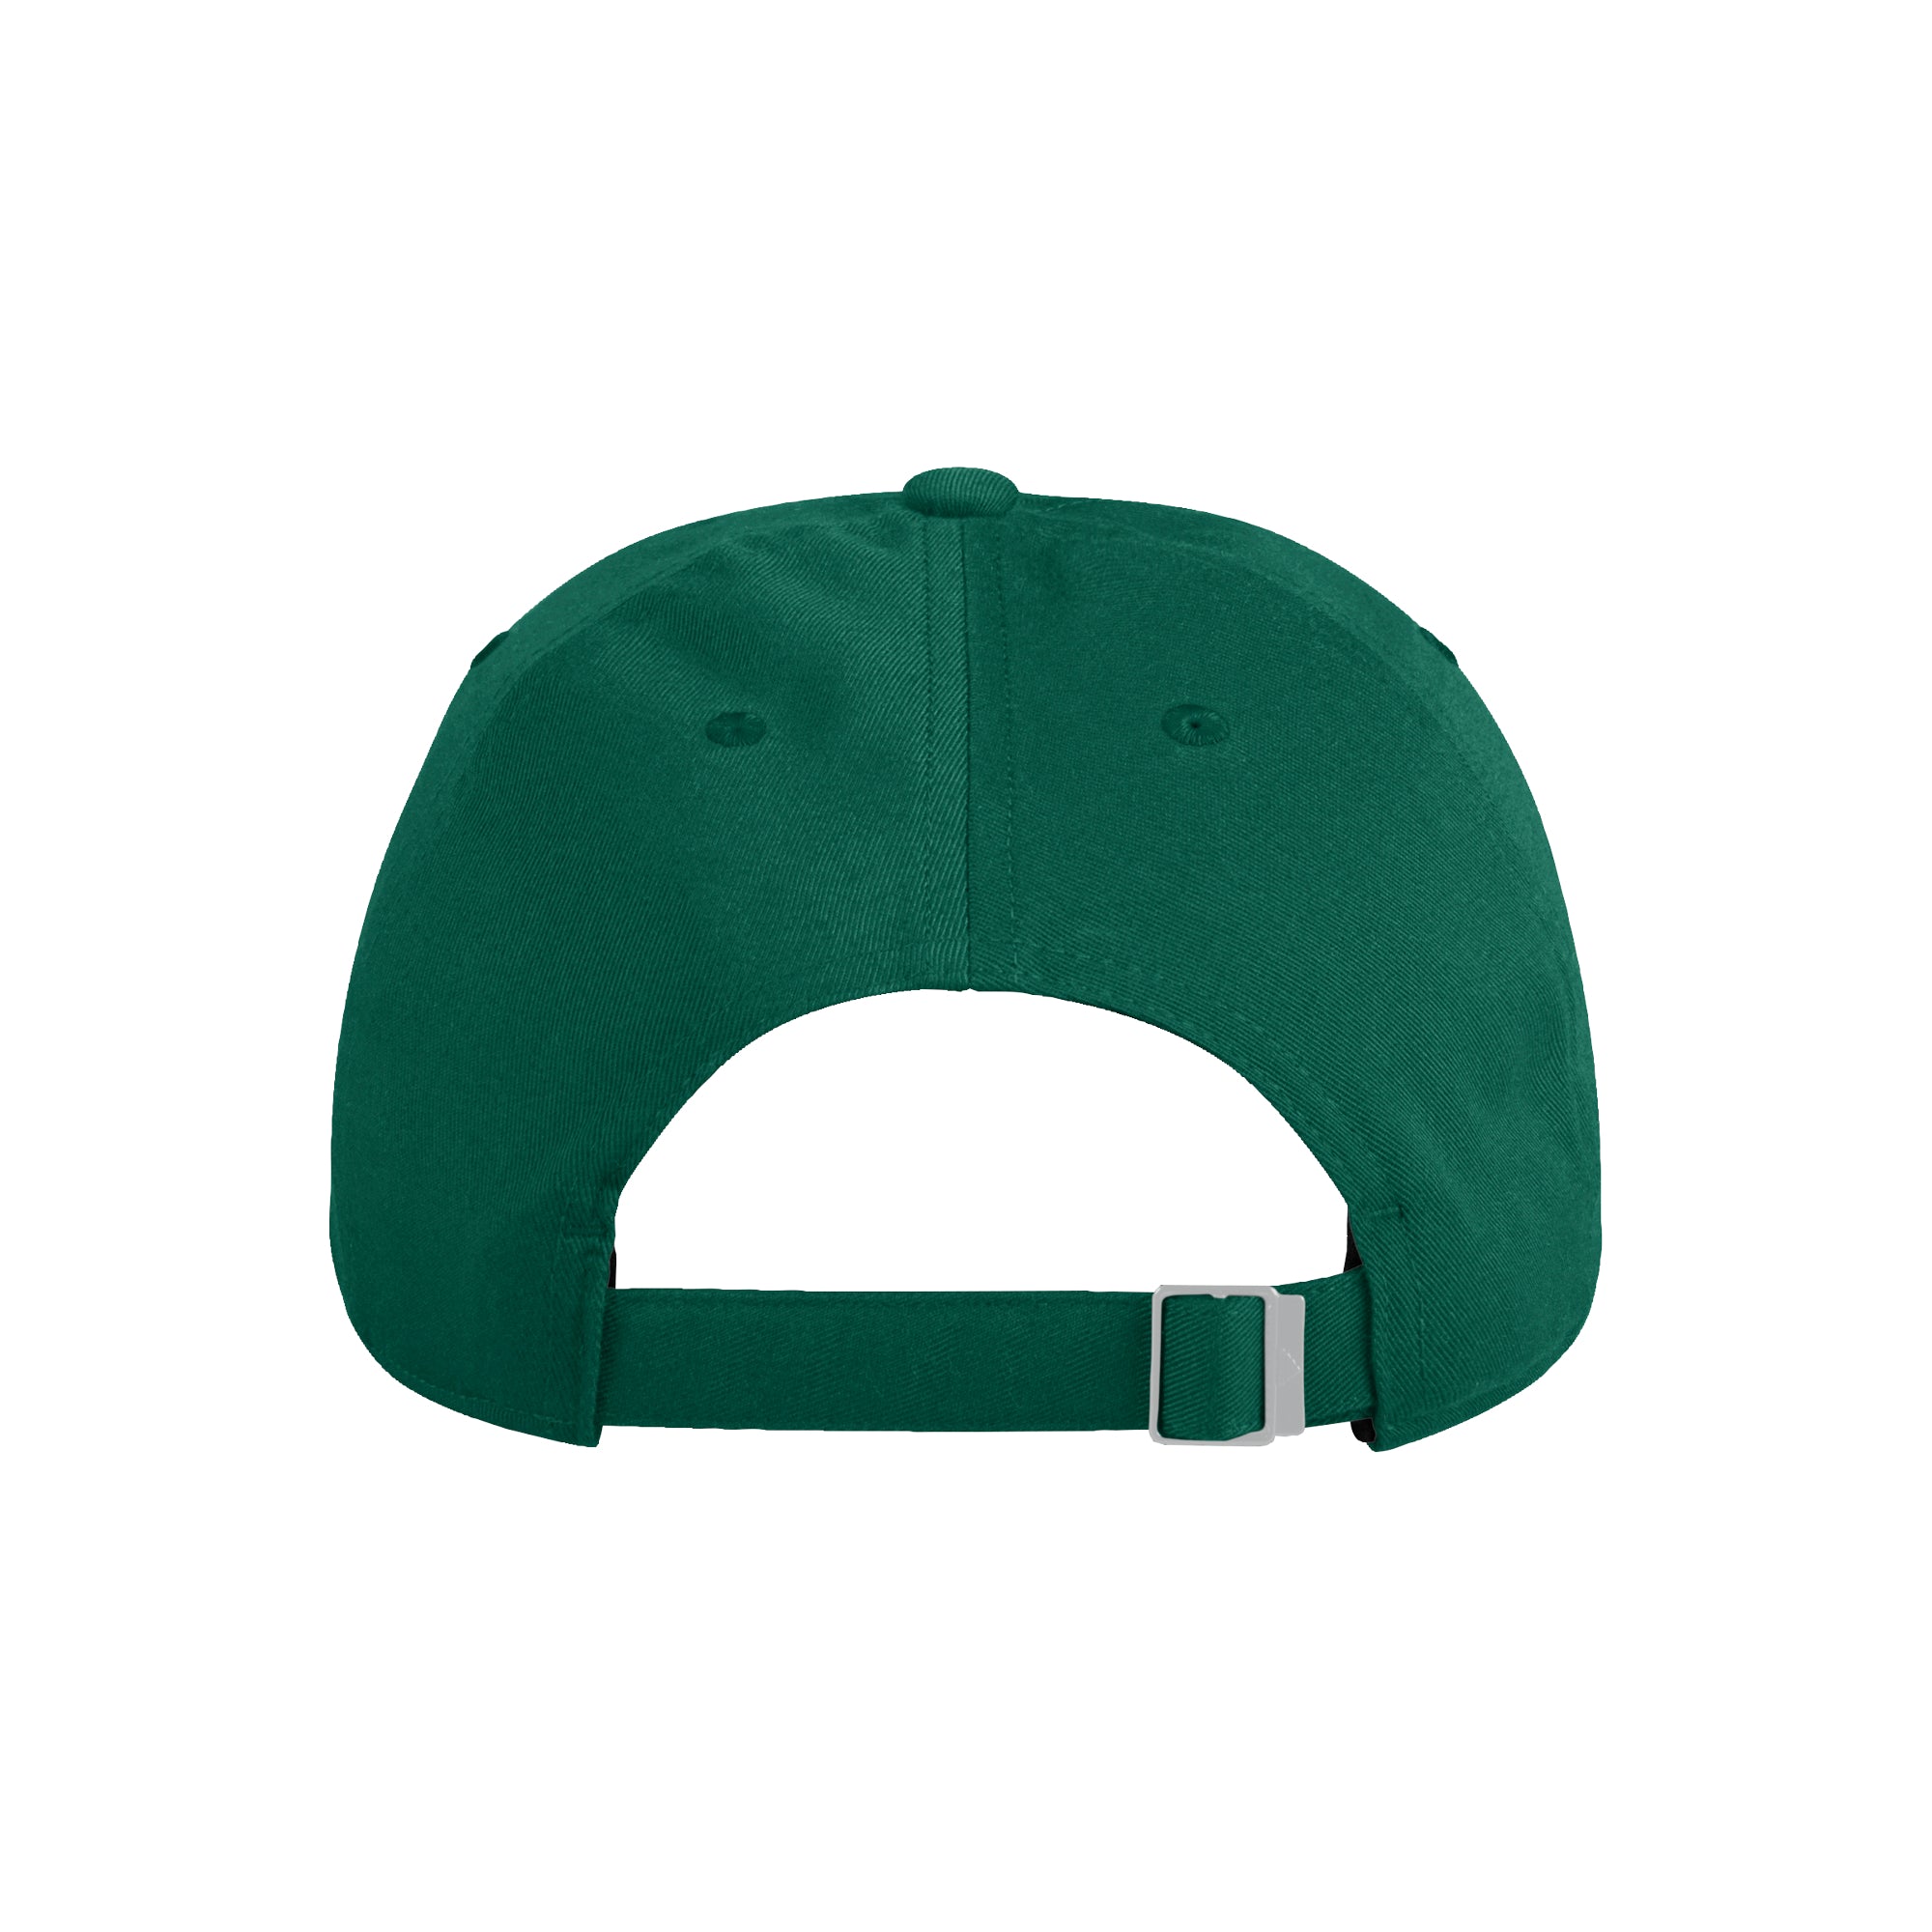 Miami Hurricanes adidas State Logo Slouch Adjustable Hat - Green